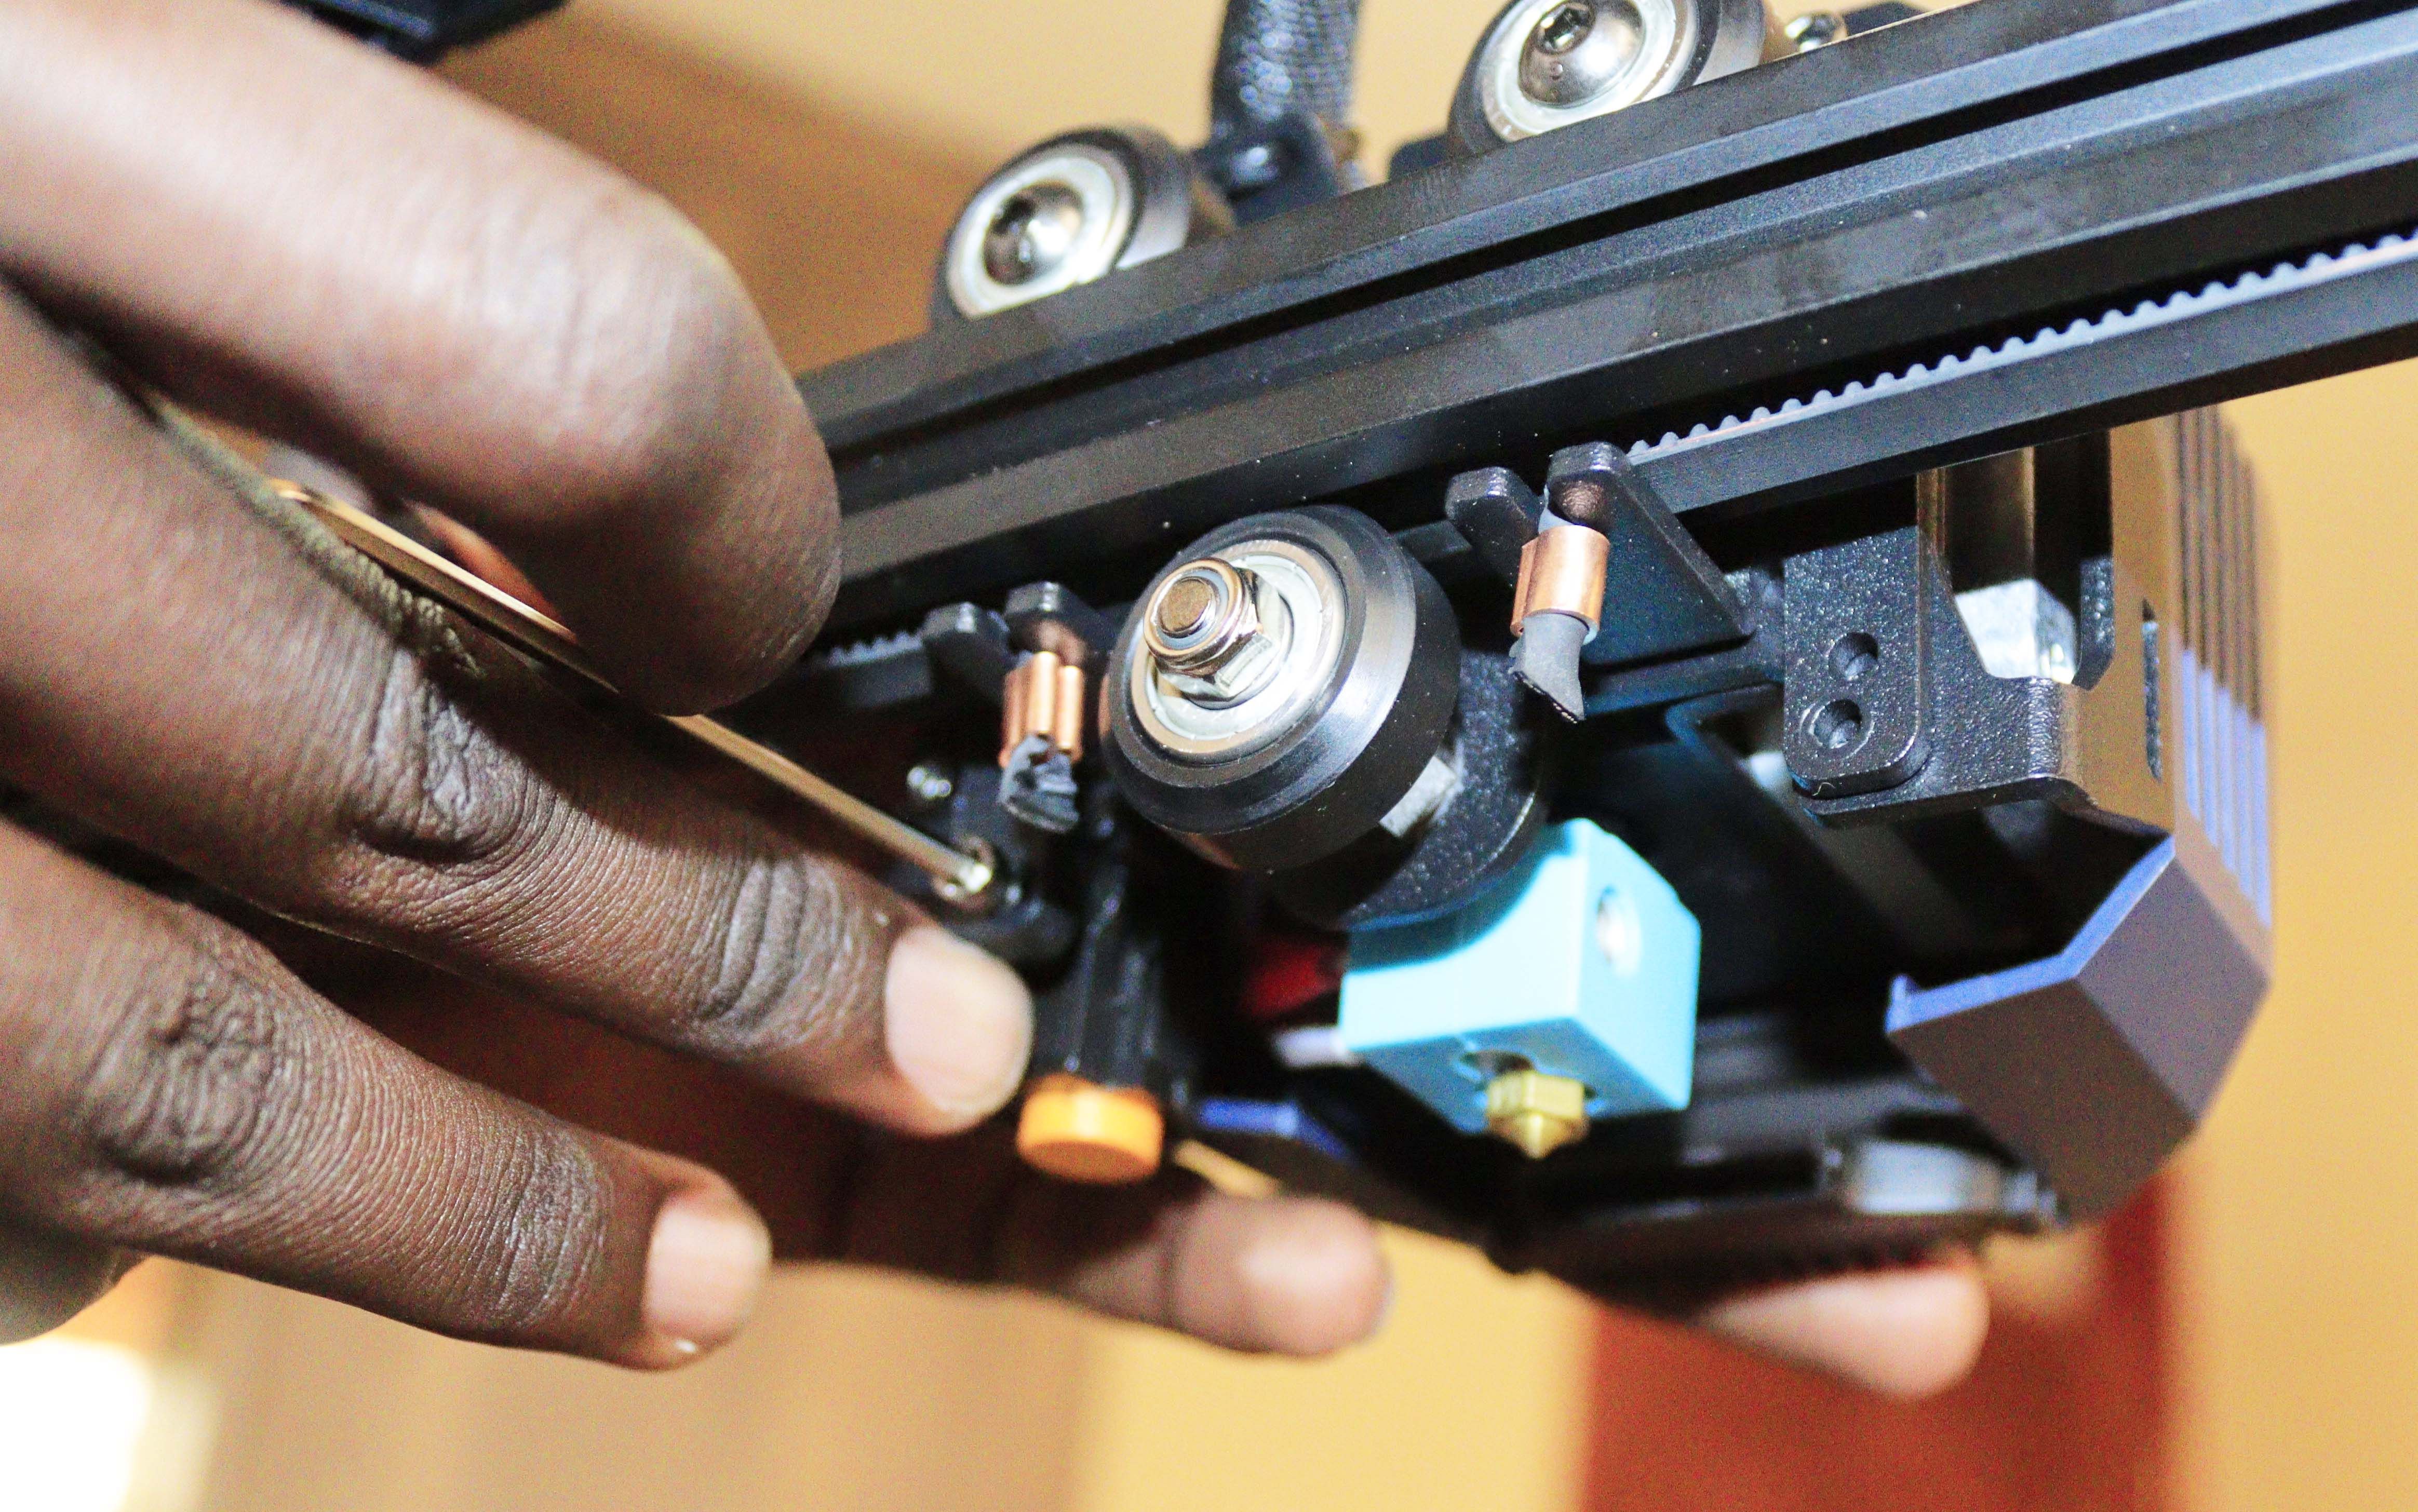 Using a wrench to tighten the screws on the print head